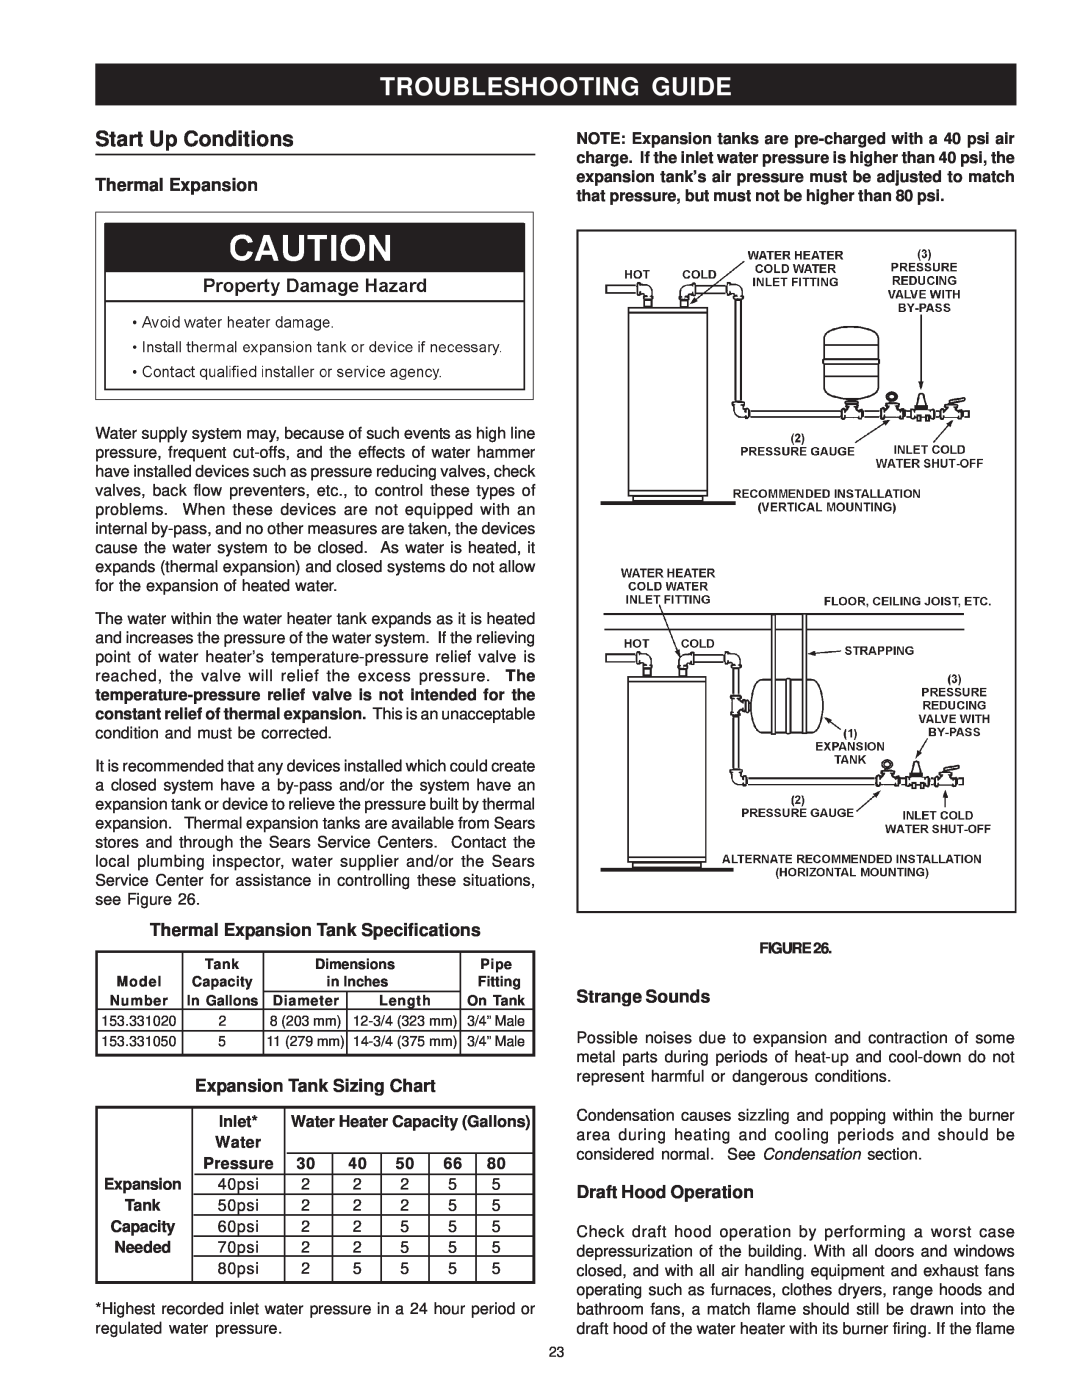 Sears 153.336762 30 GALLON PROPANE (L.P.) Troubleshooting Guide, Thermal Expansion Tank Specifications, Strange Sounds 